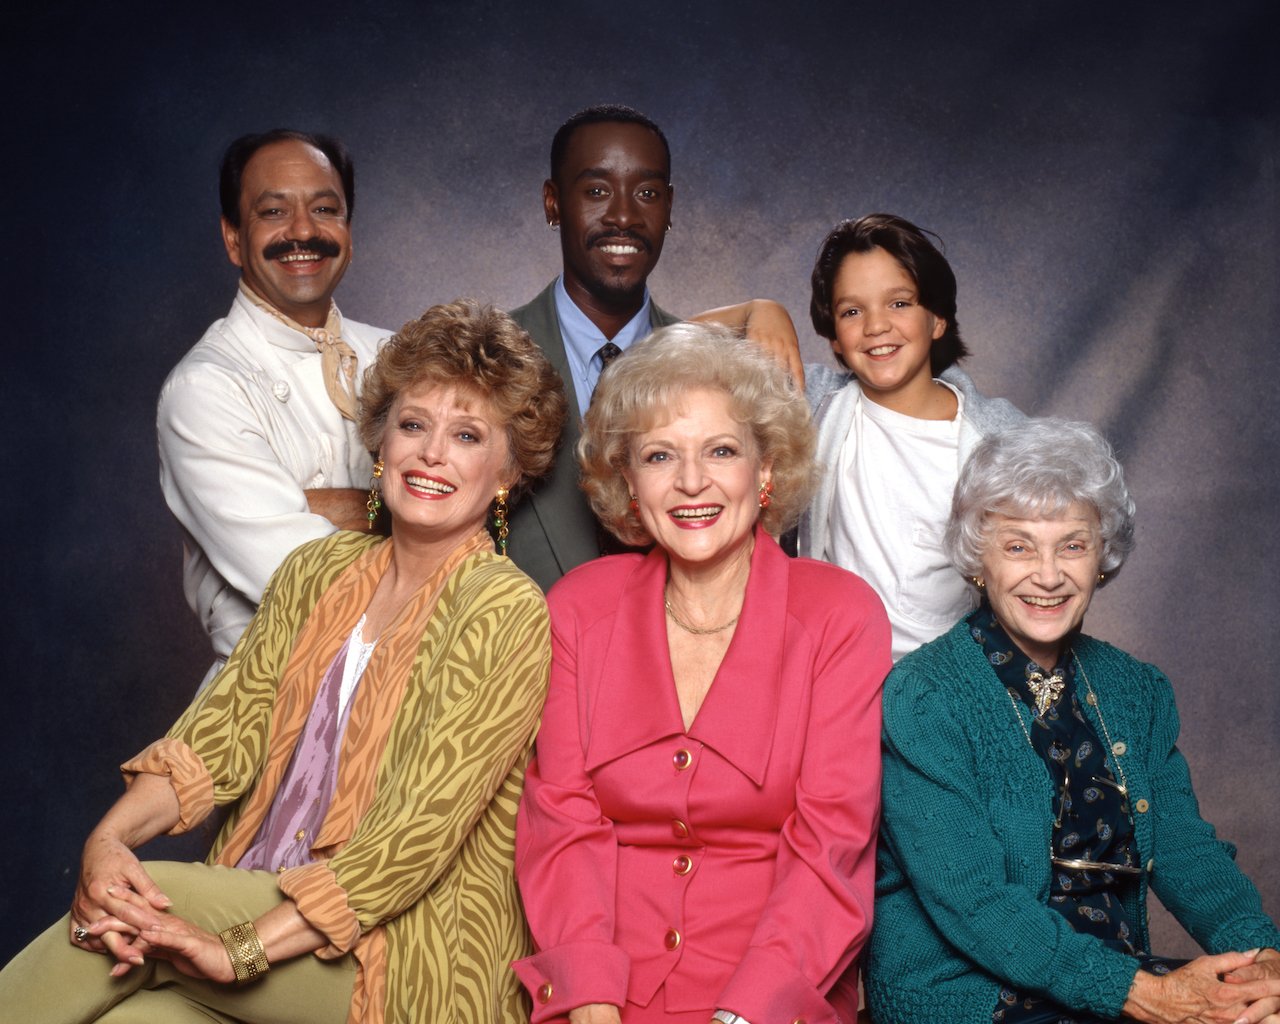 The Golden Girls spinoff The Golden Palace Betty White